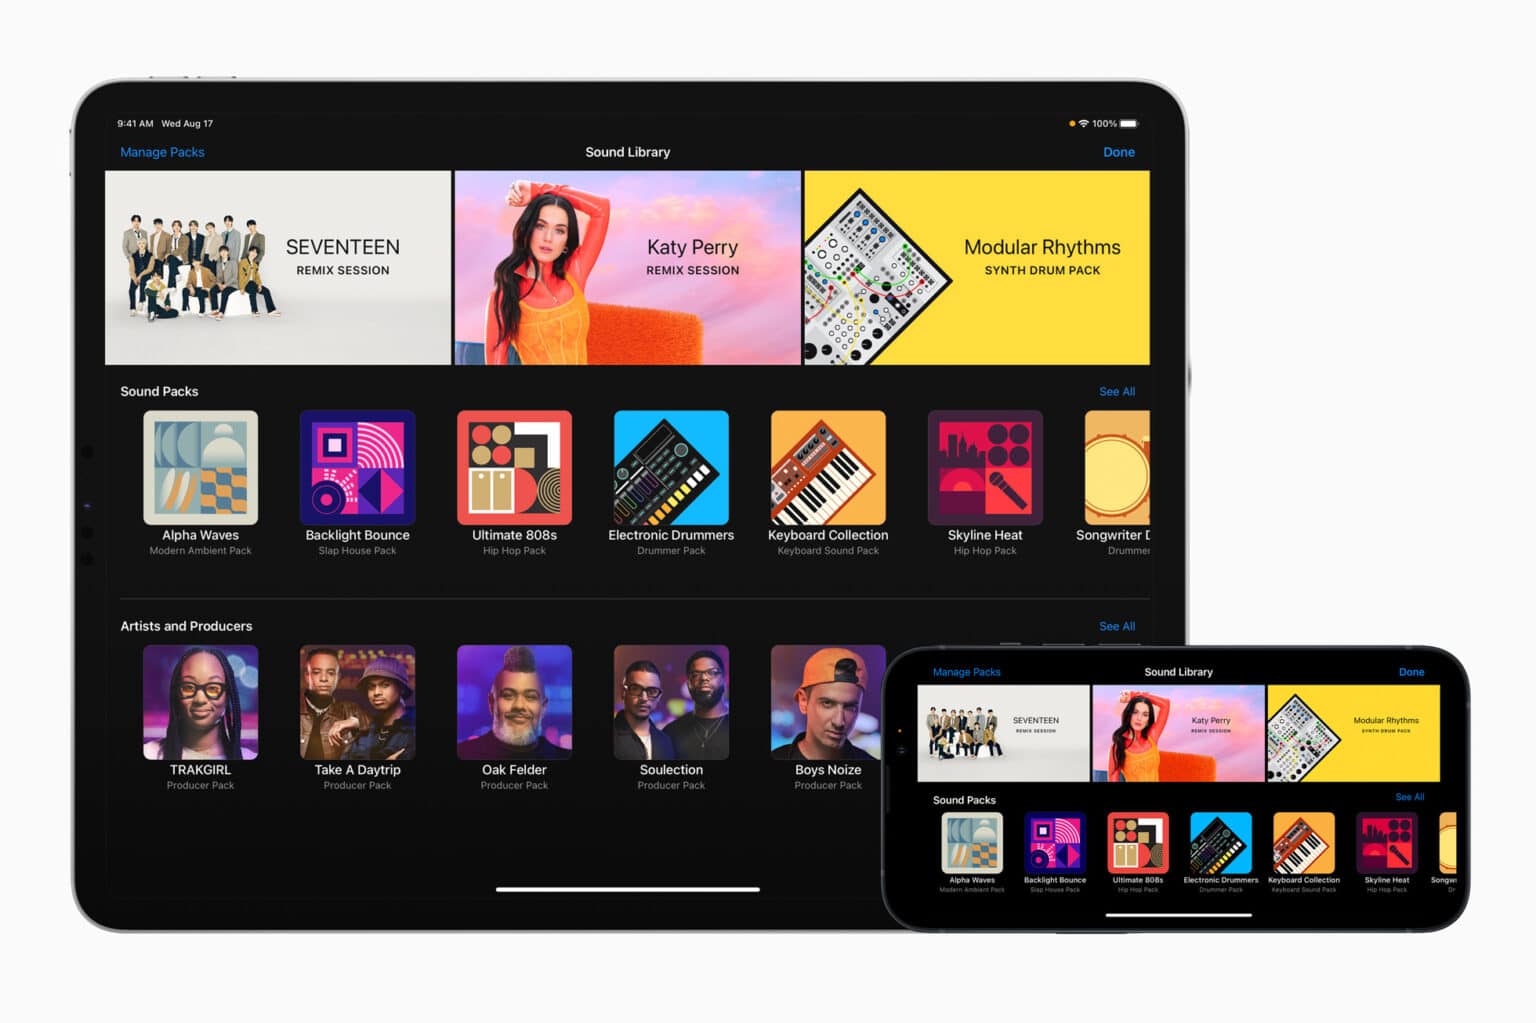 Using GarageBand on iPhone and iPad, aspiring musicians can learn how to remix hit songs from Katy Perry and K-pop supergroup Seventeen.